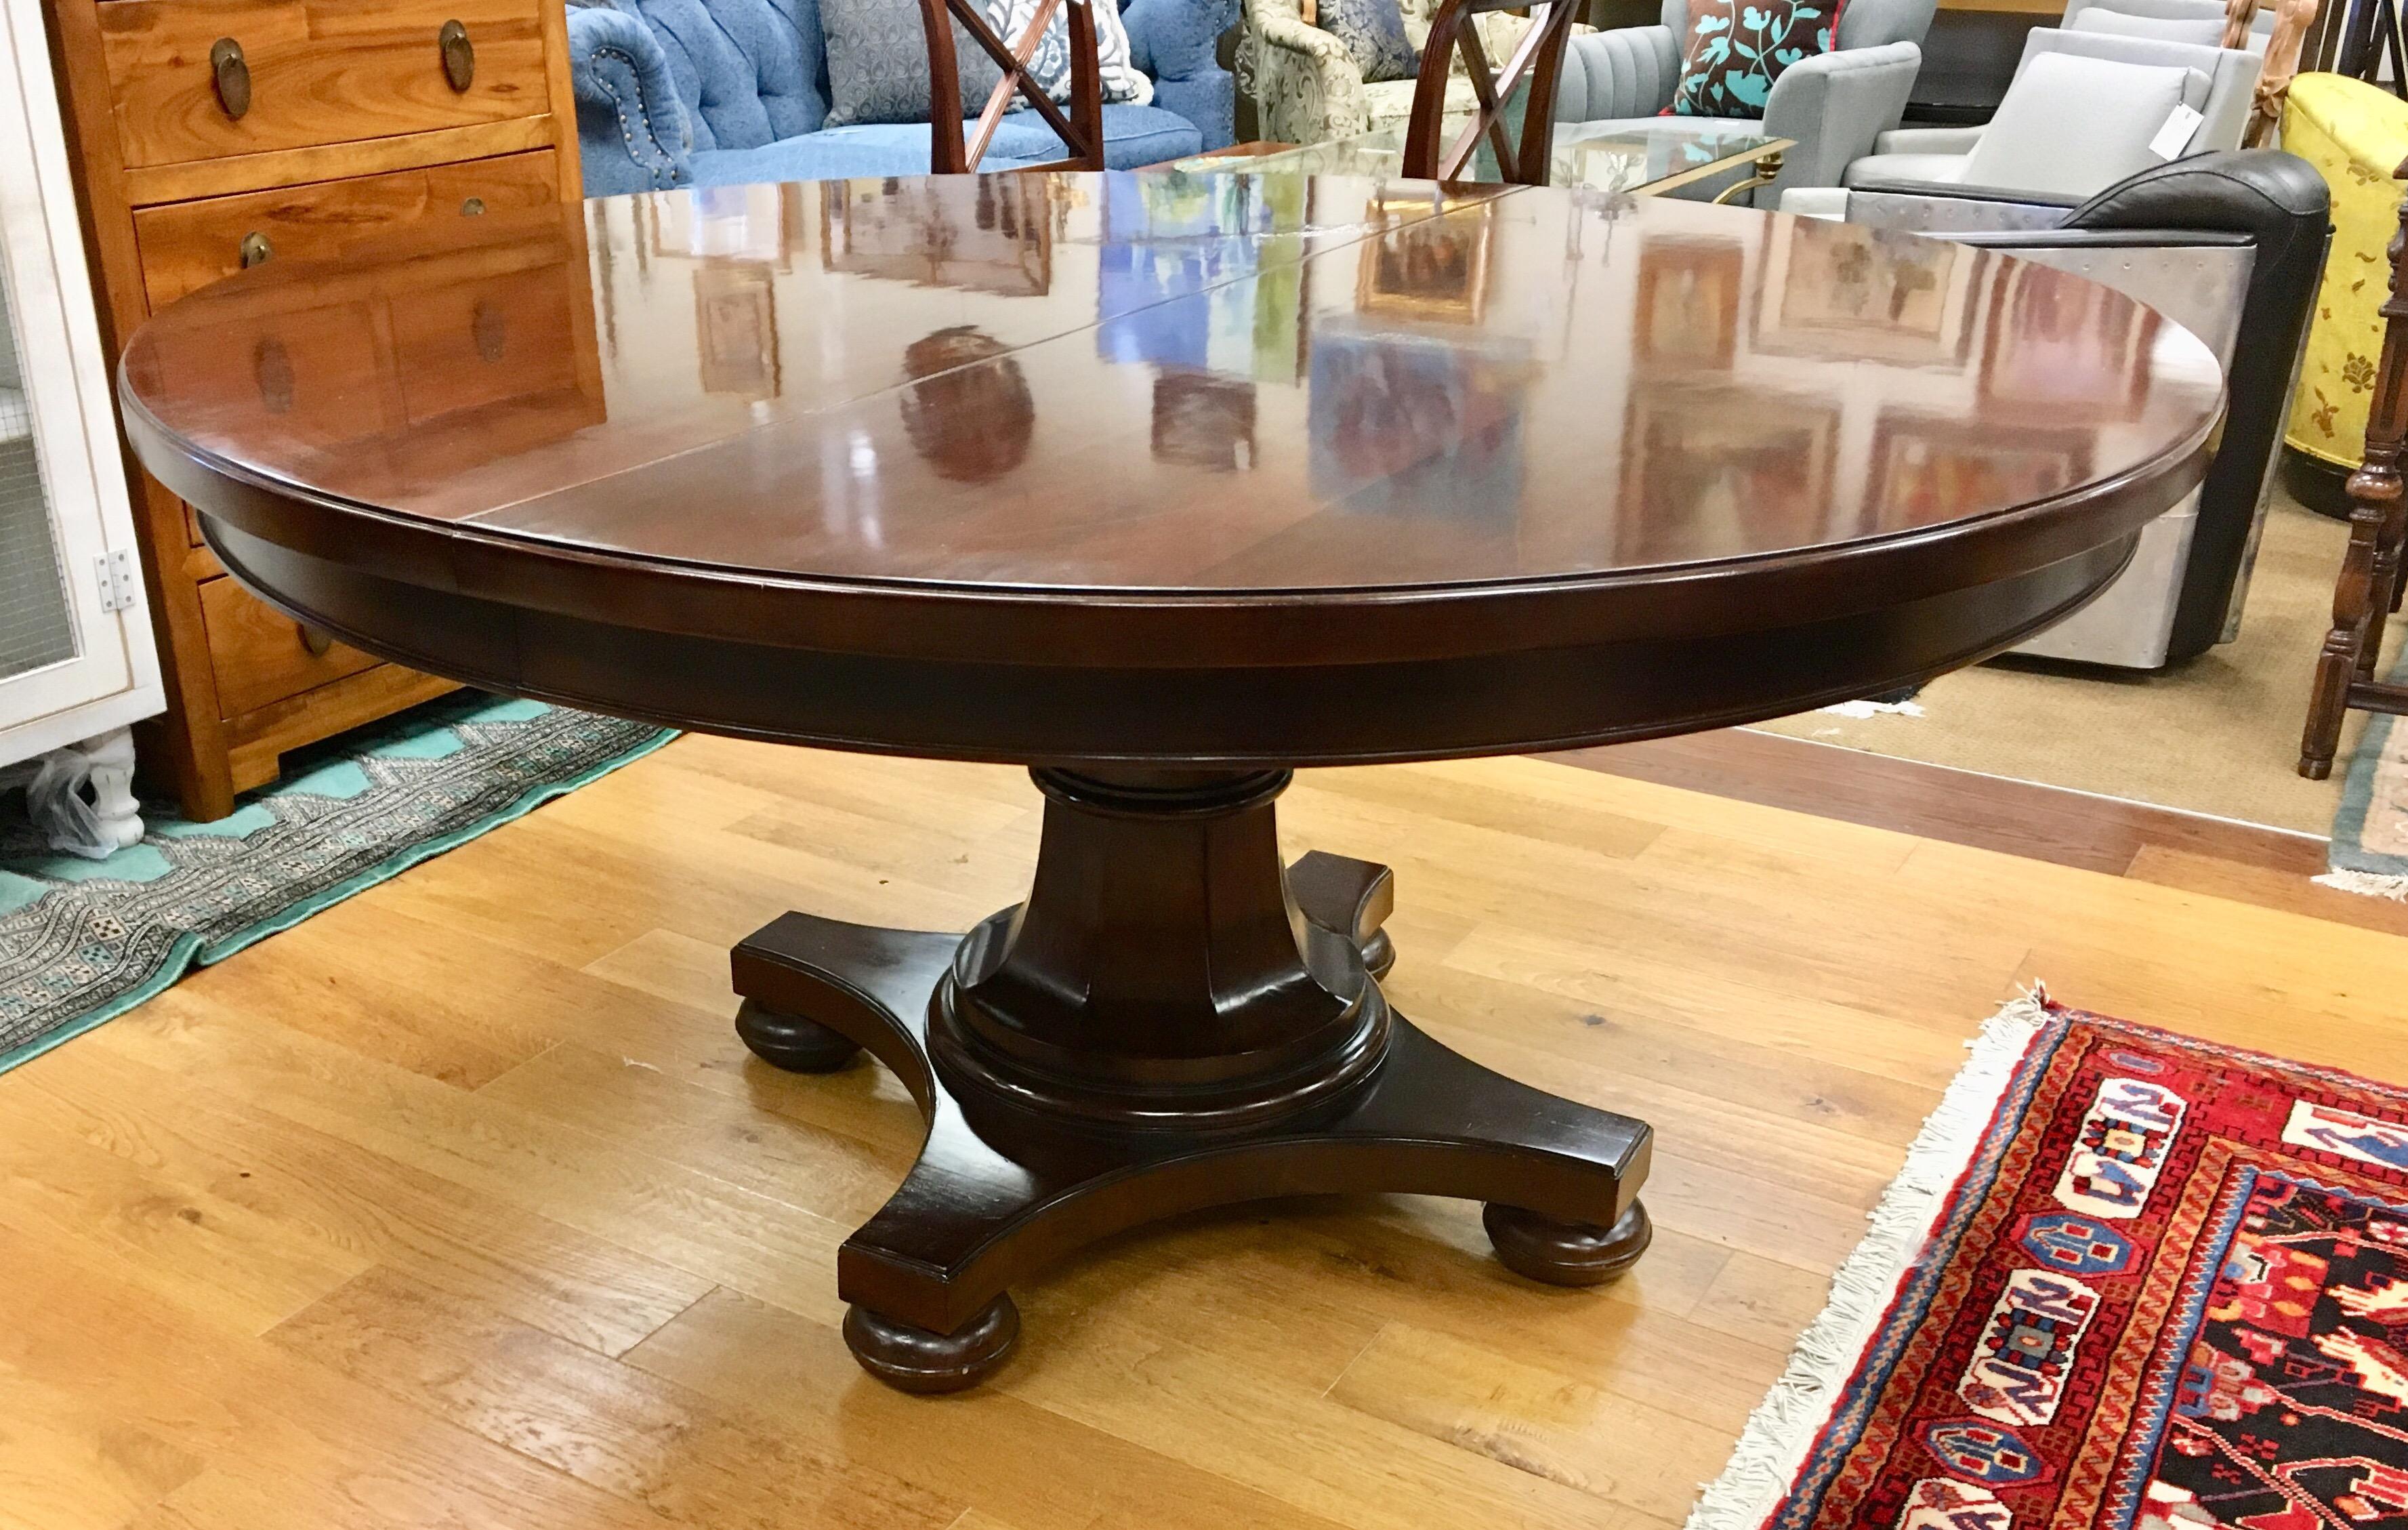 Heavy Bernhardt round mahogany pedestal dining room table, circa early 21st Century. The round table is 5 feet in diameter and expands to 7 feet with 24 inch leaf and becomes oval in shape.